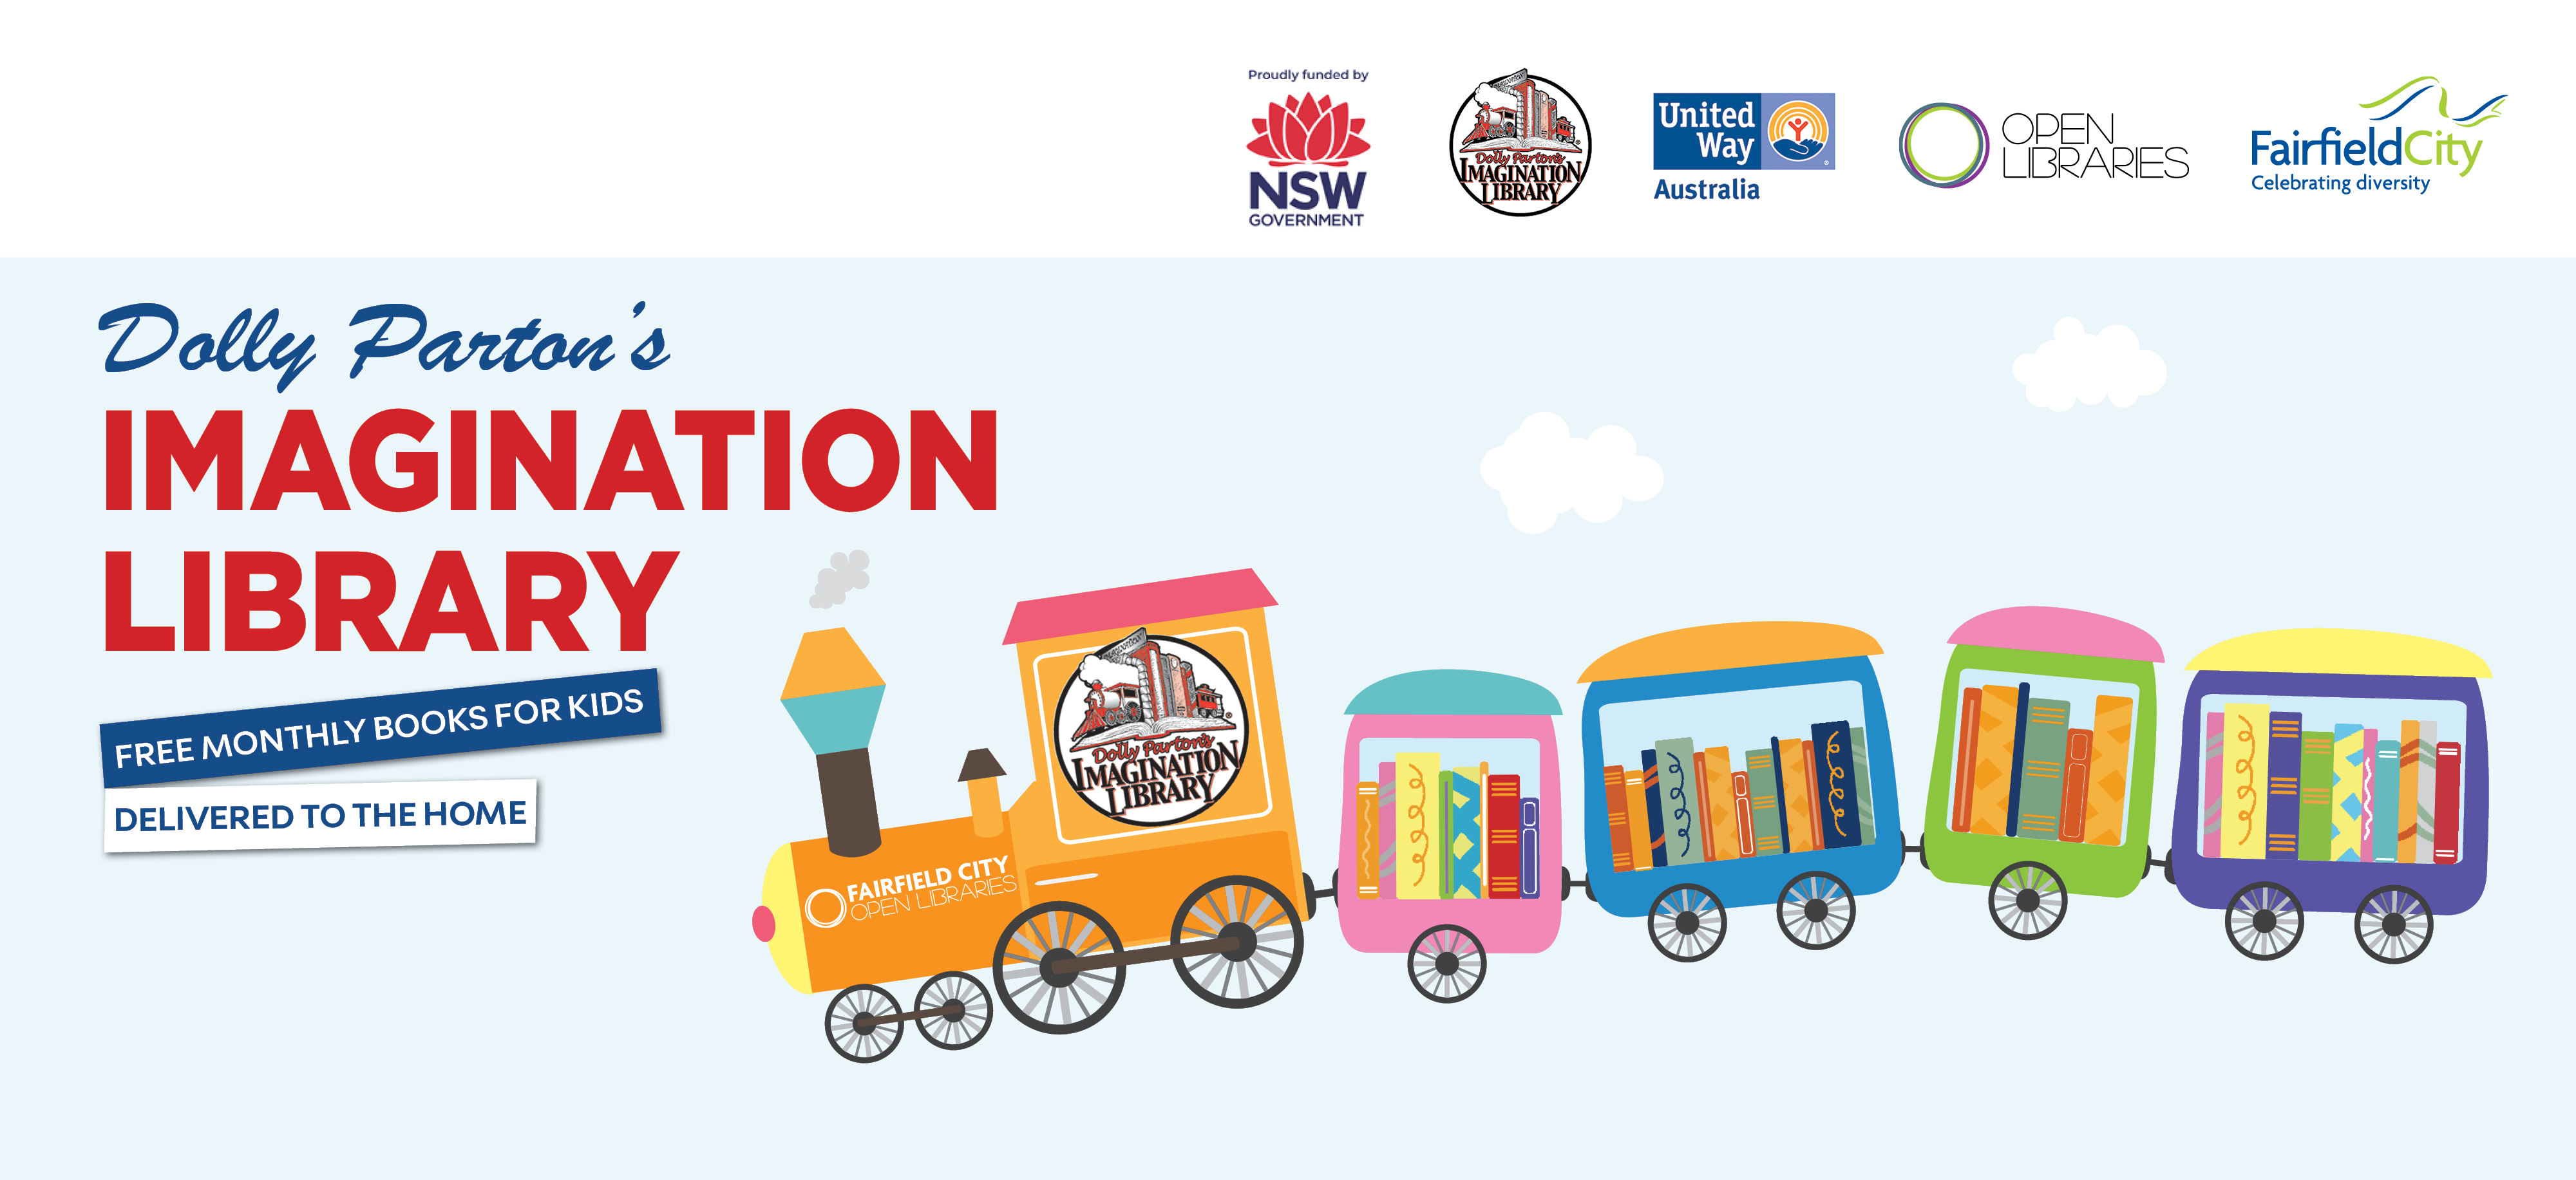 Fictional train carrying four carriages full of books. Text reads Dolly Parton's Imagination Library - free monthly books for kids delivered to the home - visit one of our branches to register for the Imagination Library Program